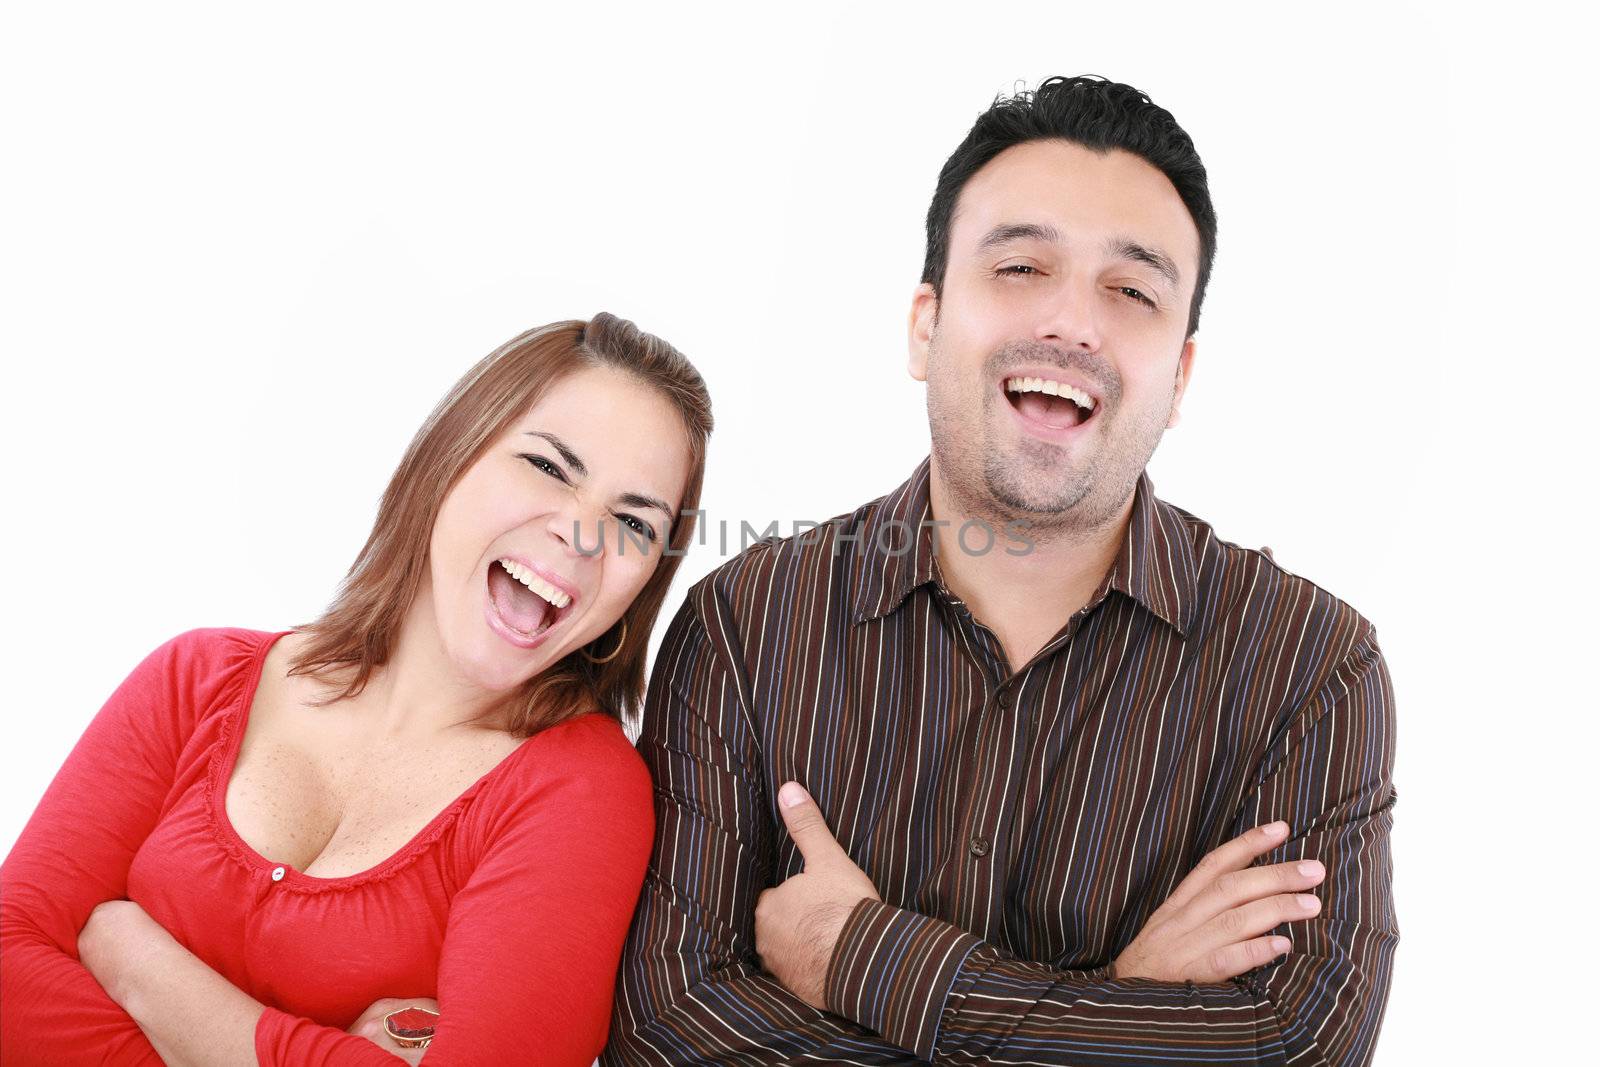 Portrait of an excited young couple on white background